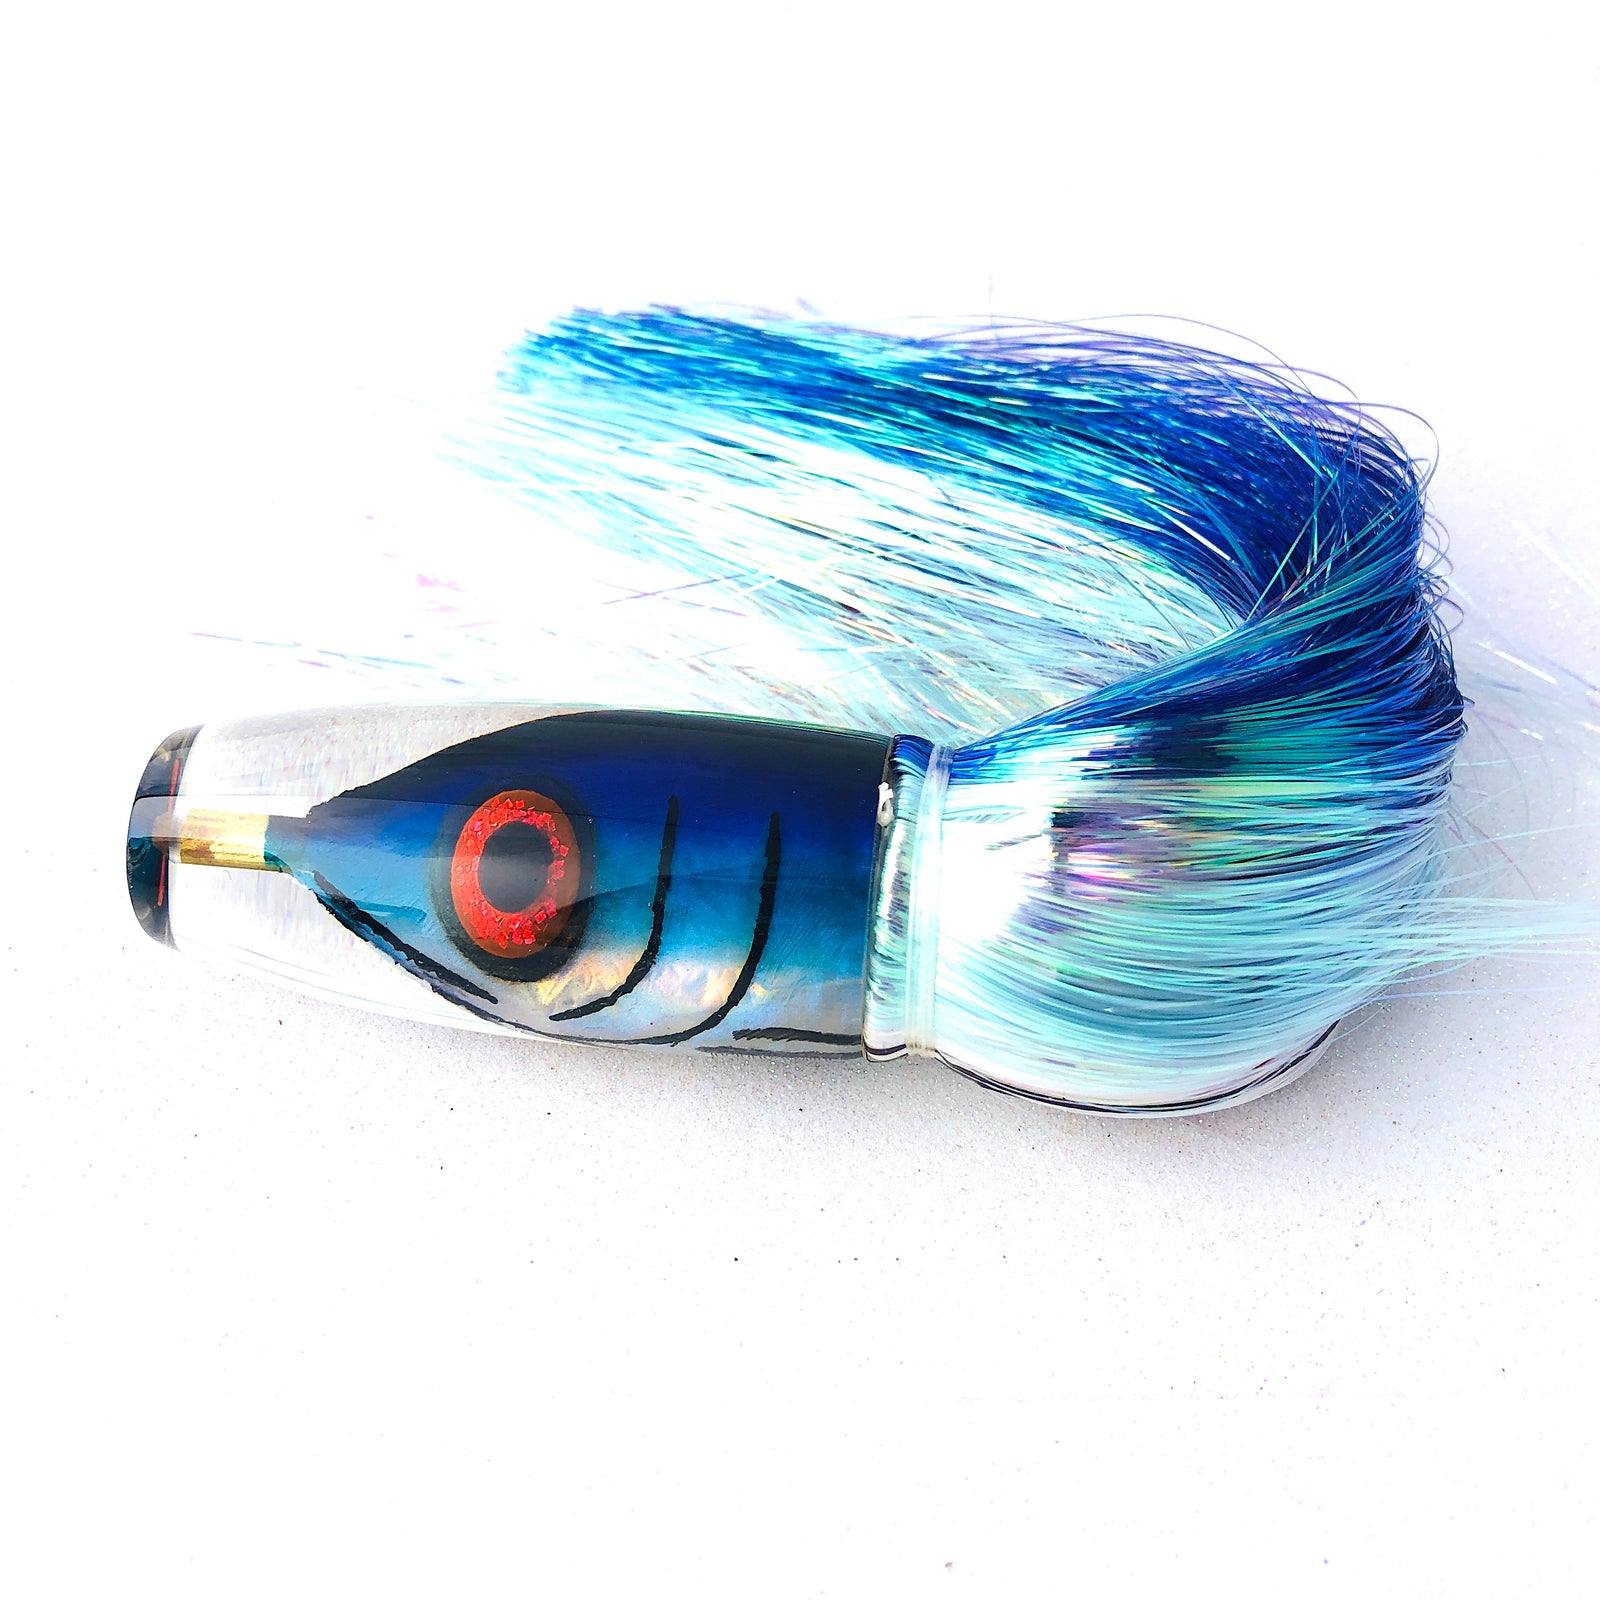 Flashabou -In Stock Now. Shop all New and Used Saltwater Tackle